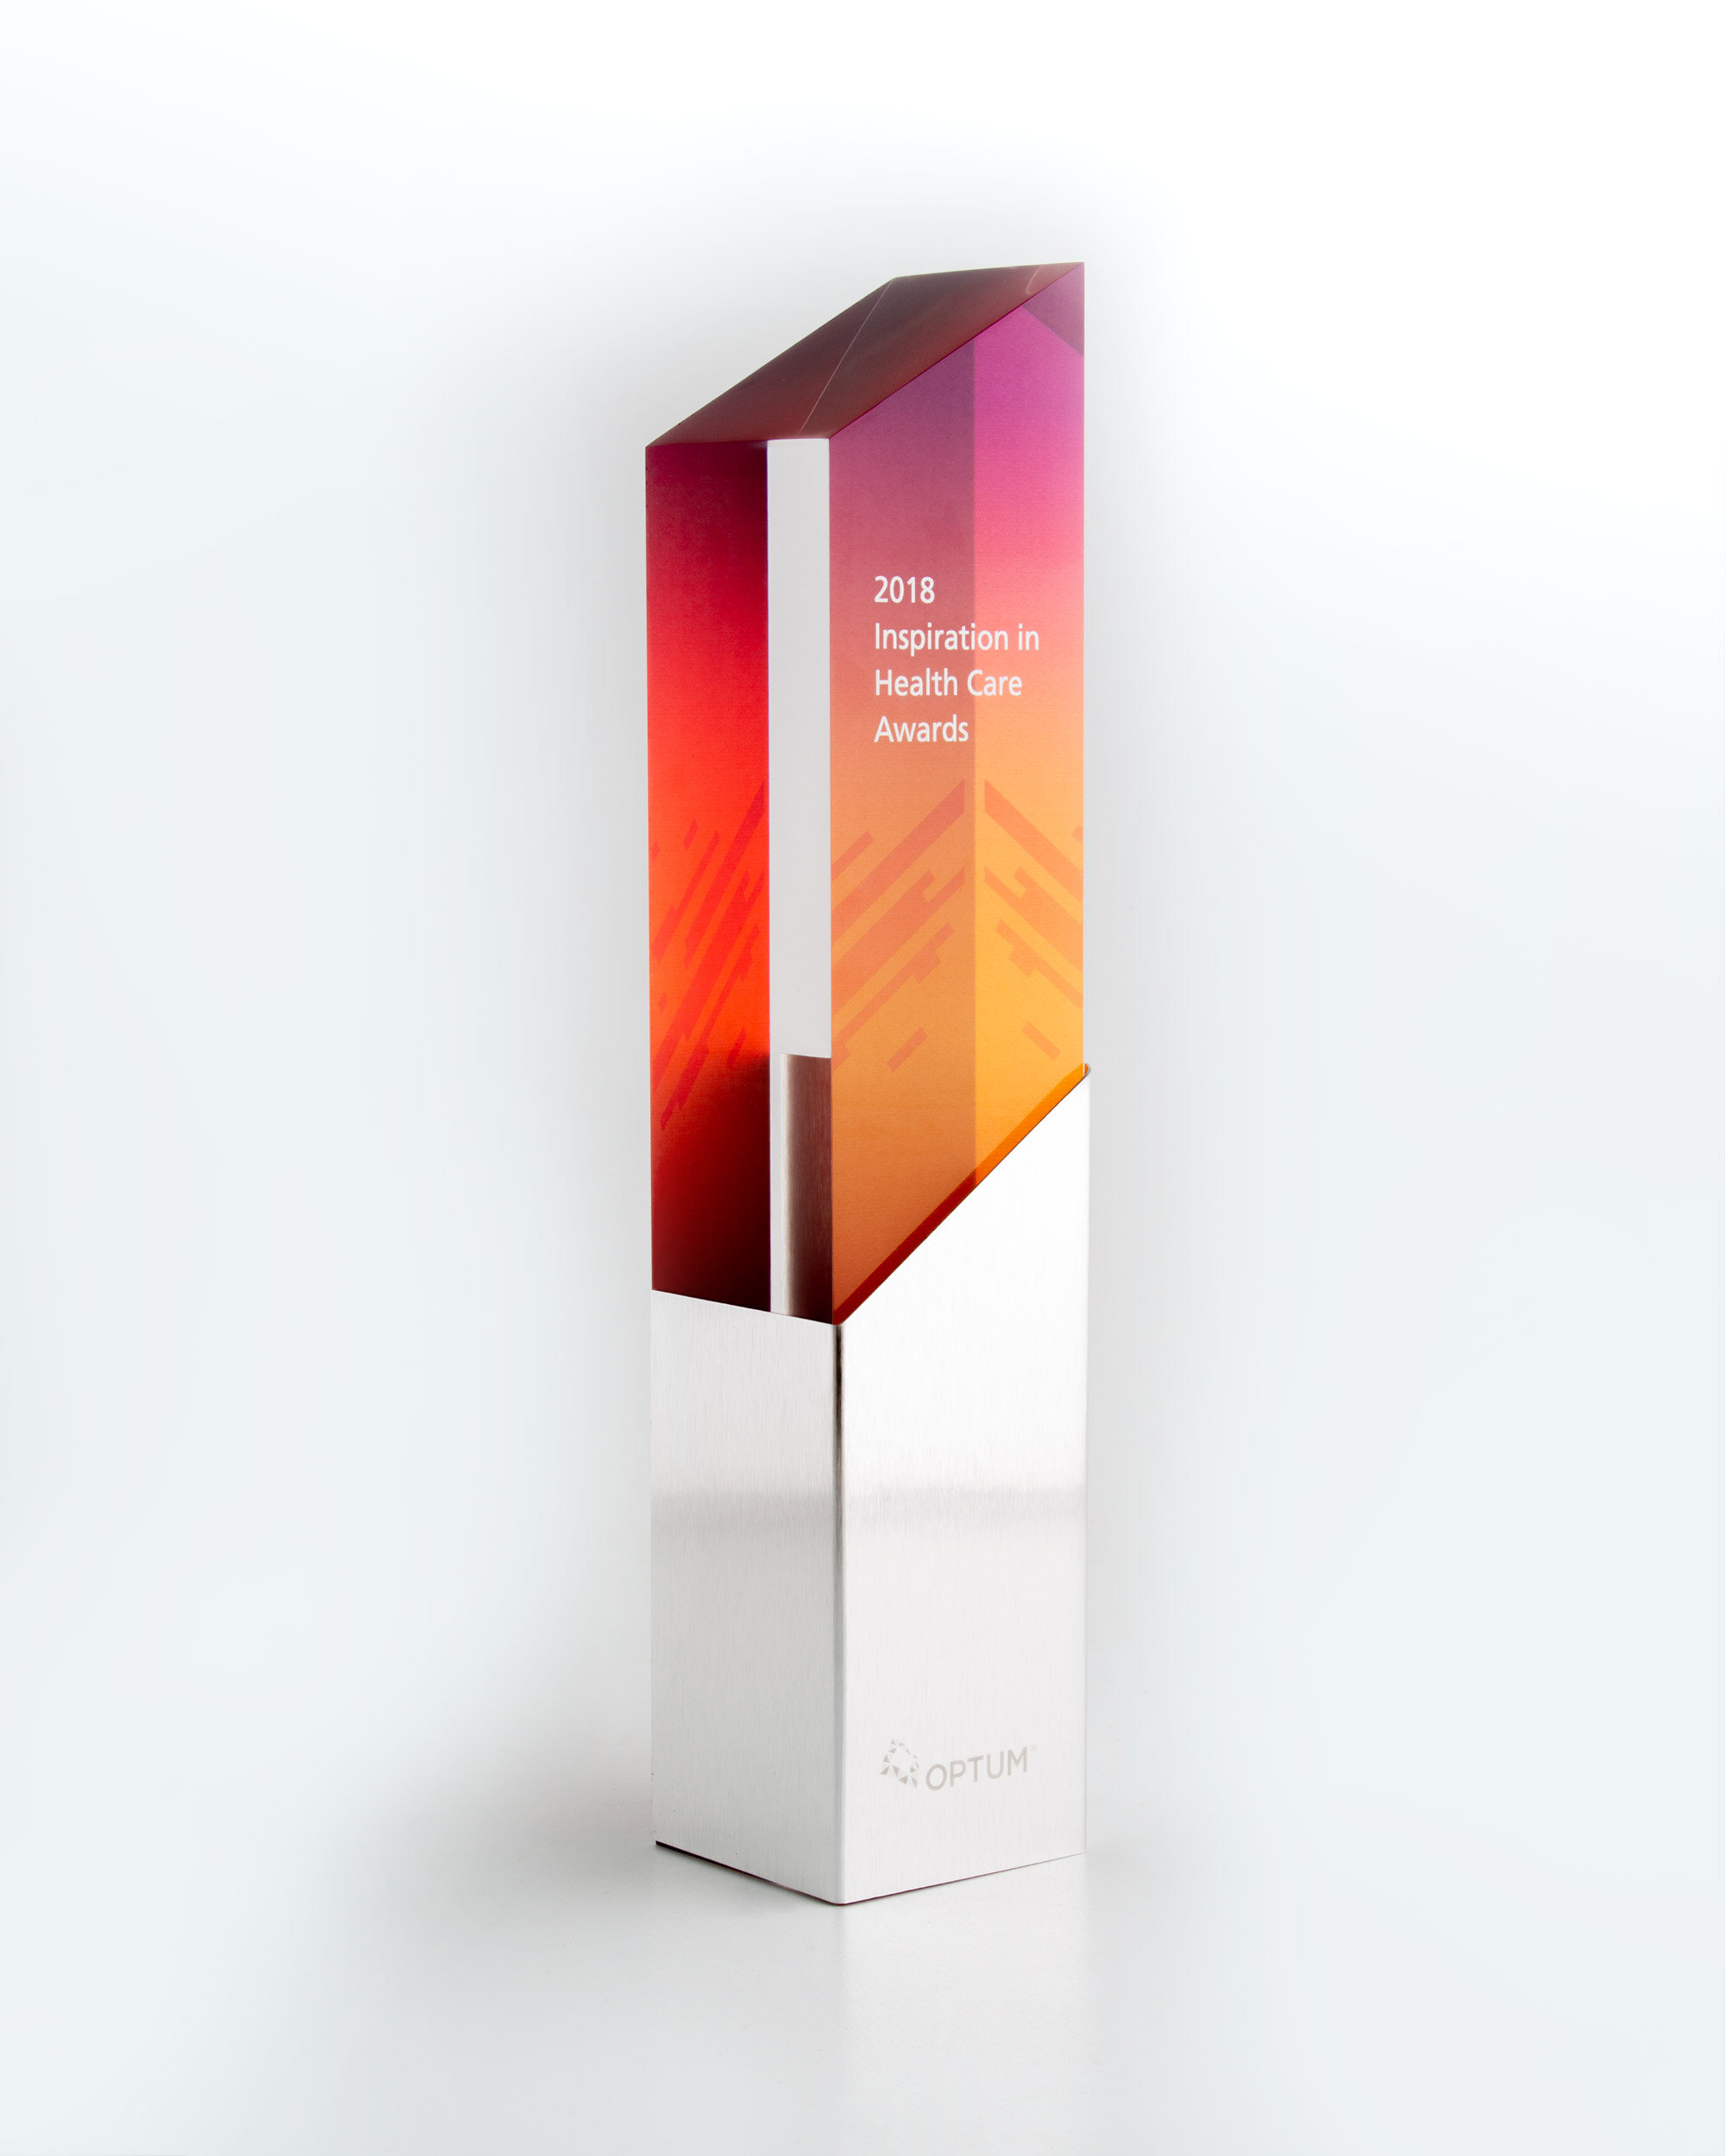 optum-inspiration-in-healthcare-awards-acrylic-and-brushed-metal 2.jpg